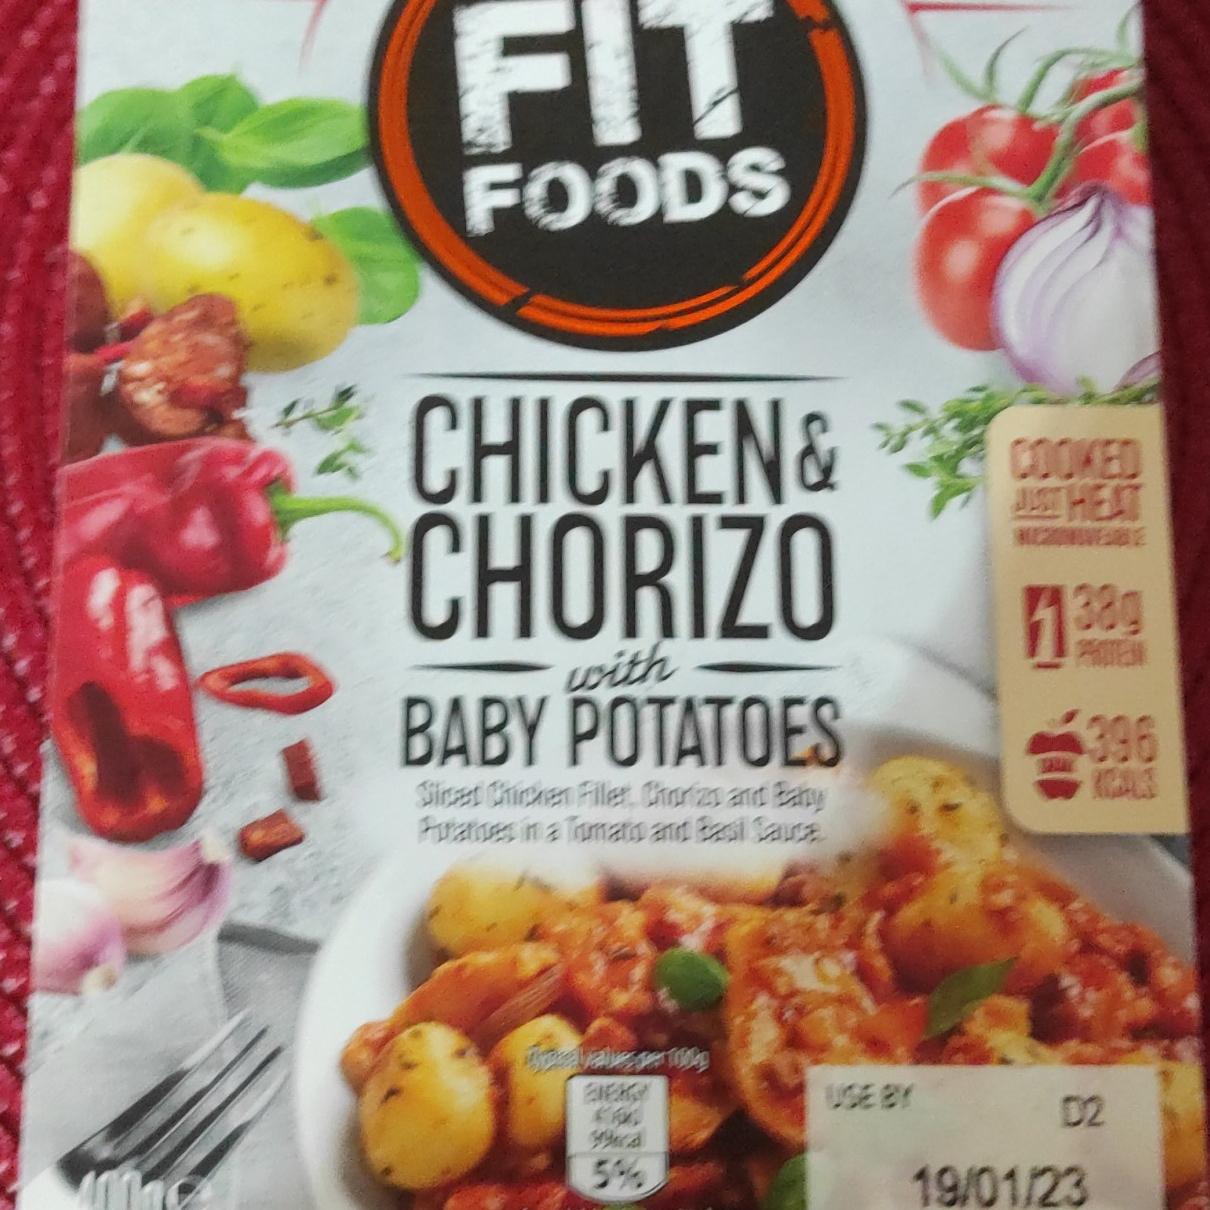 Fotografie - Chicken & chorizo with baby potatoes Fit Foods